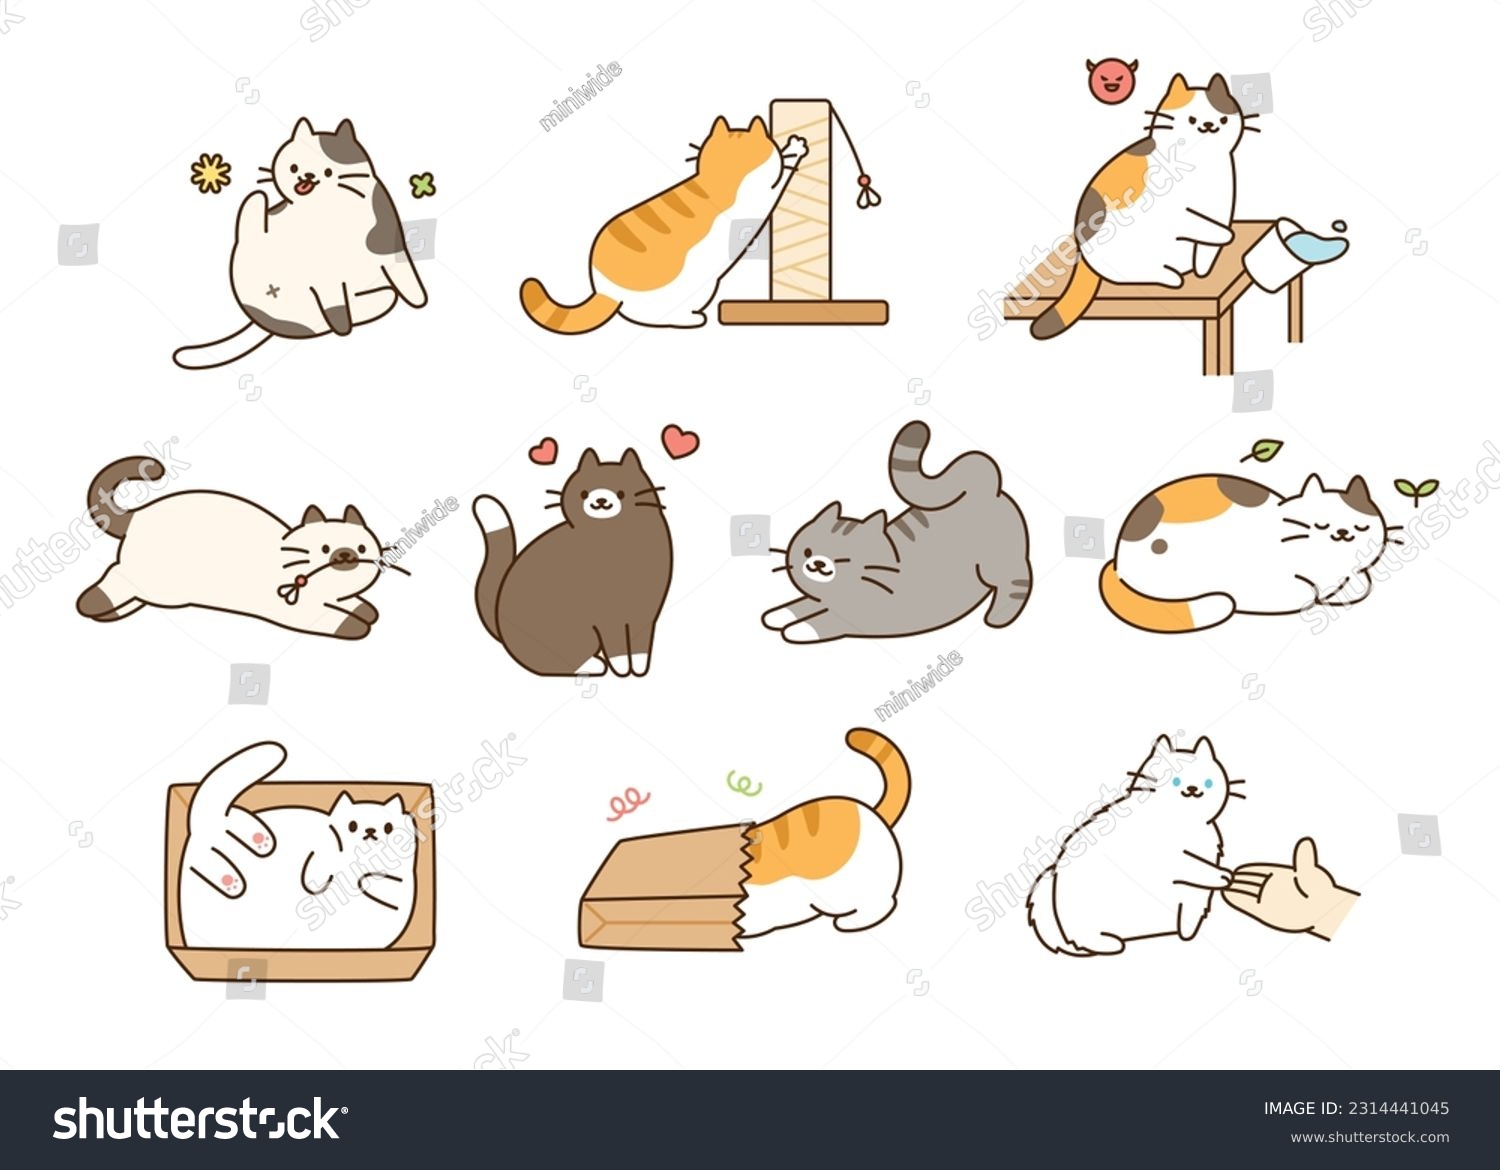 Fat cute cat lifestyle. They are joking around, having accidents, and having fun. #2314441045